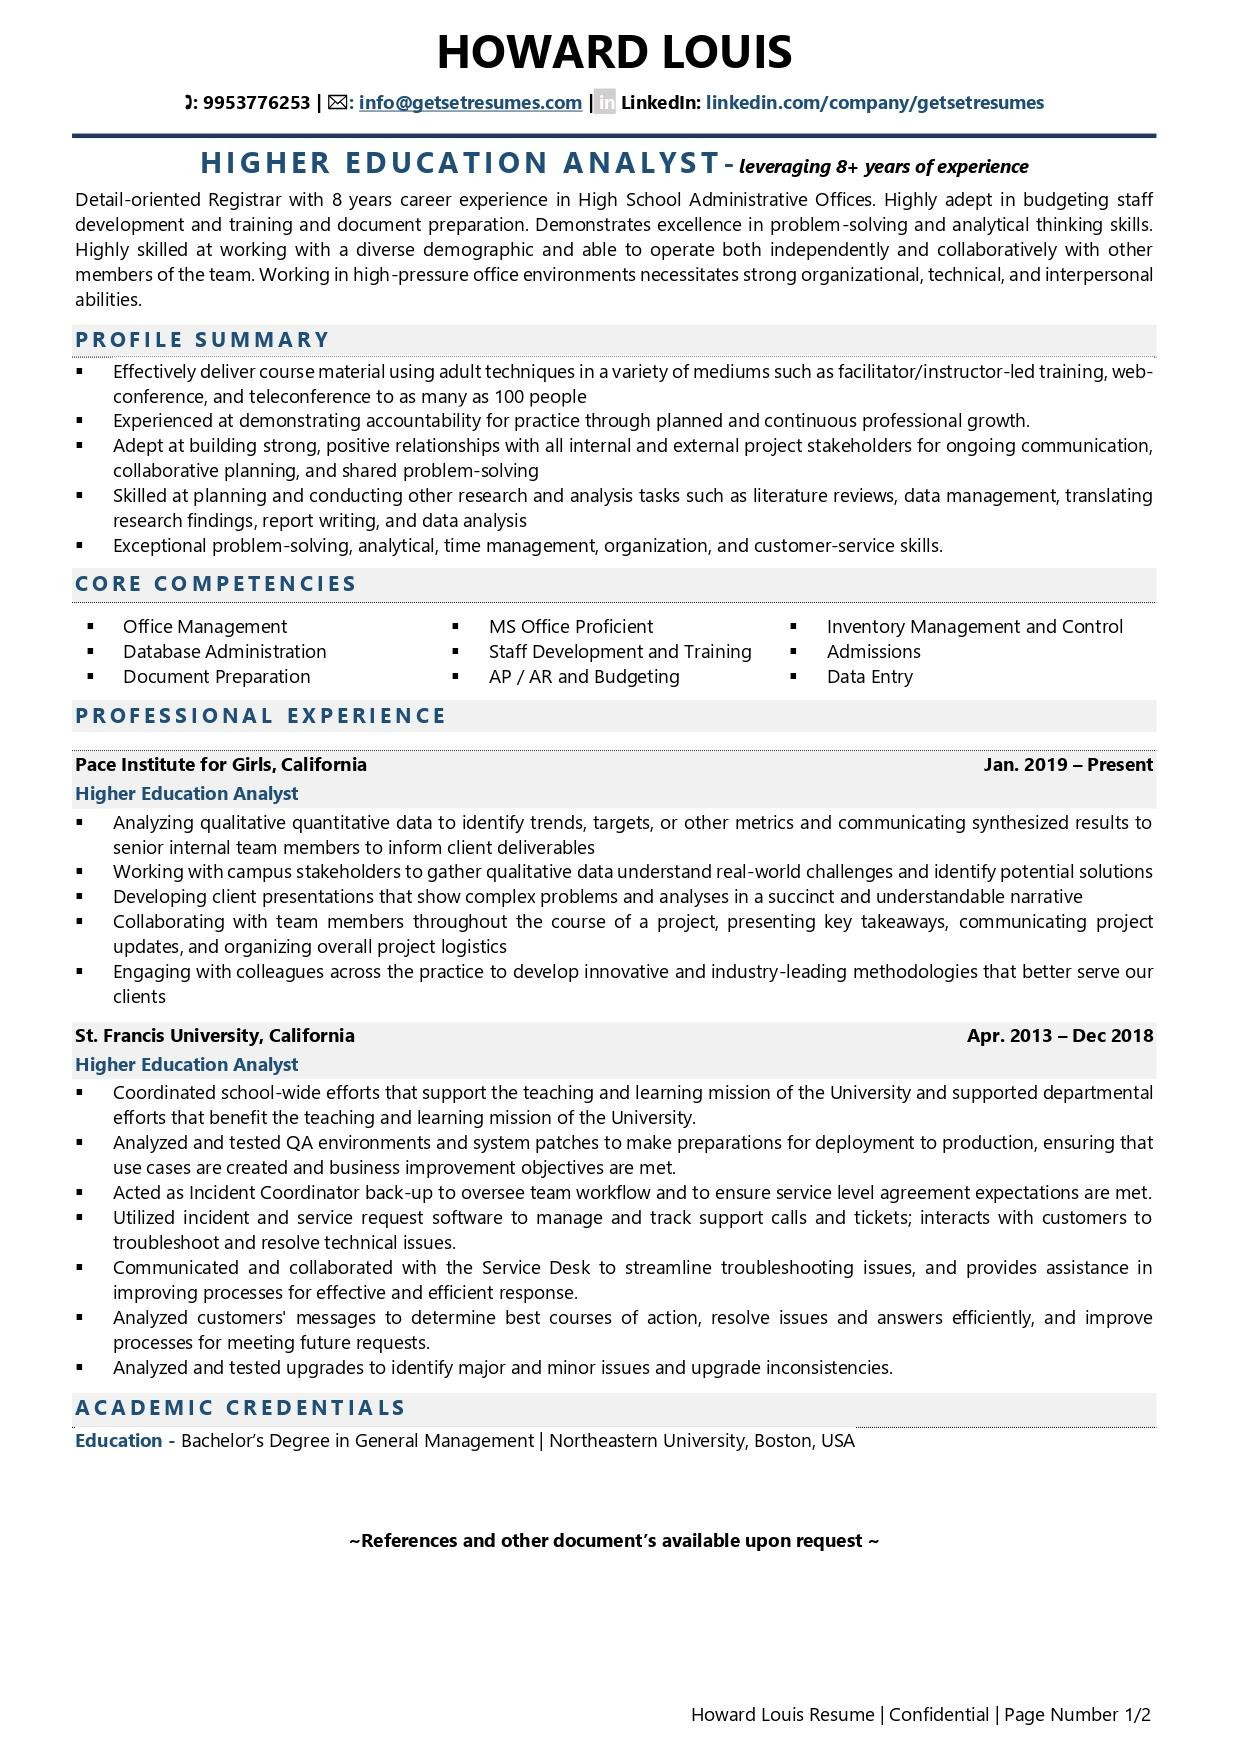 Sample Resume for Data Analyst Higher Education Higher Education Analyst Resume Examples & Template (with Job …